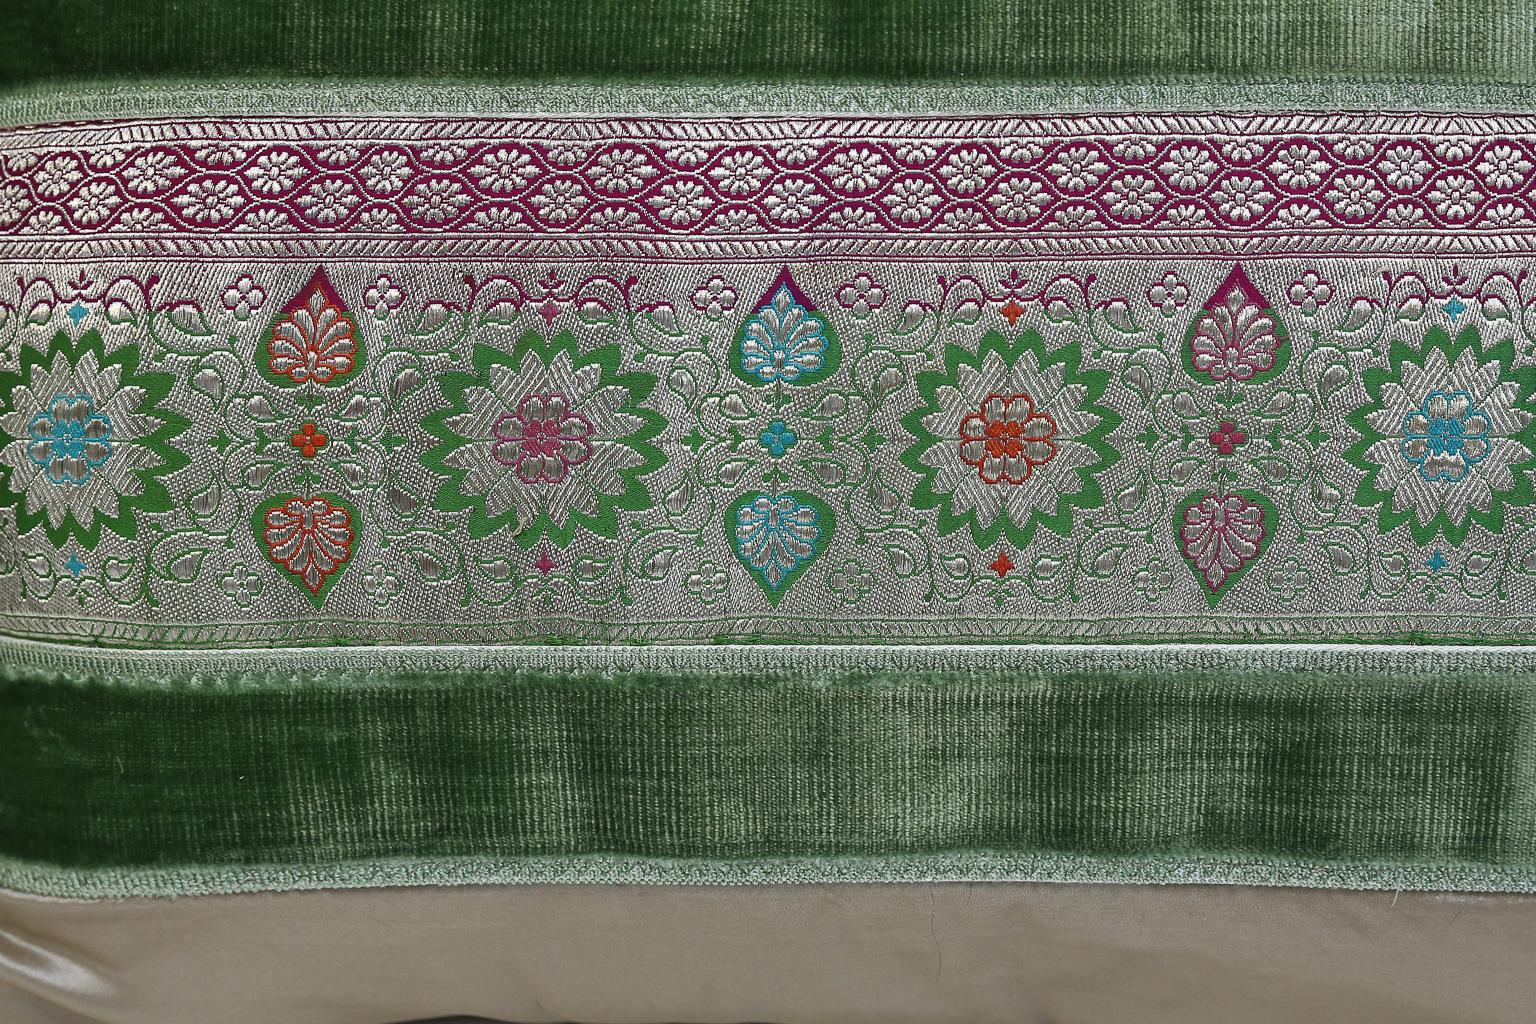 Custom pillows with vintage sari pieces framed with velvet trim. Pillow is made out of silk taffeta. Down filled. Price listed is per pillow.